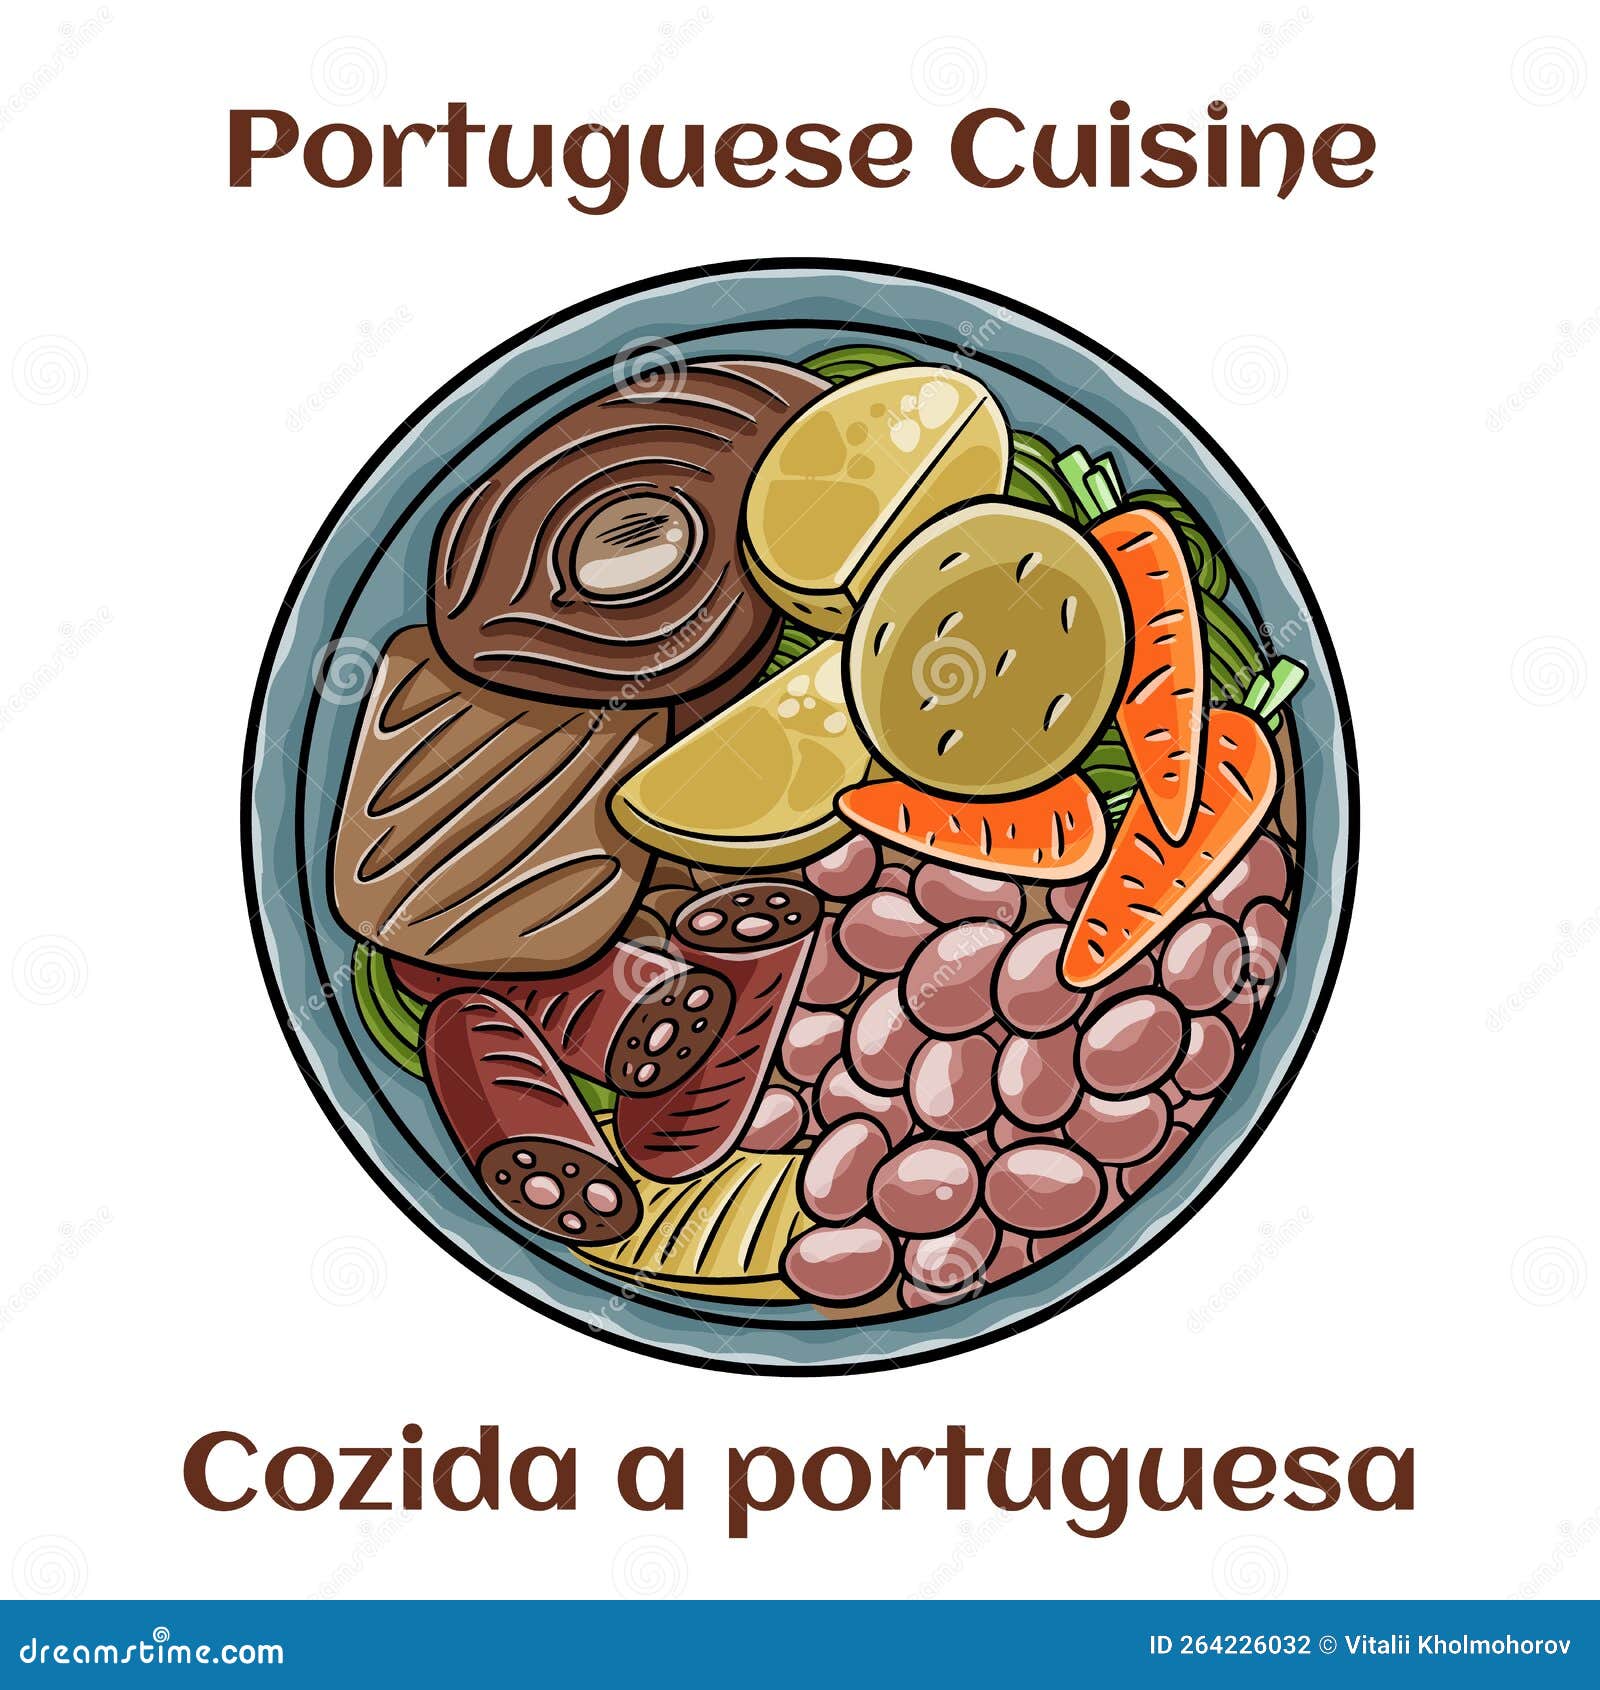 cozido a portuguesa - traditional portuguese dish with pork, beef, chicken, potatoes, beans, carrots and cabbage